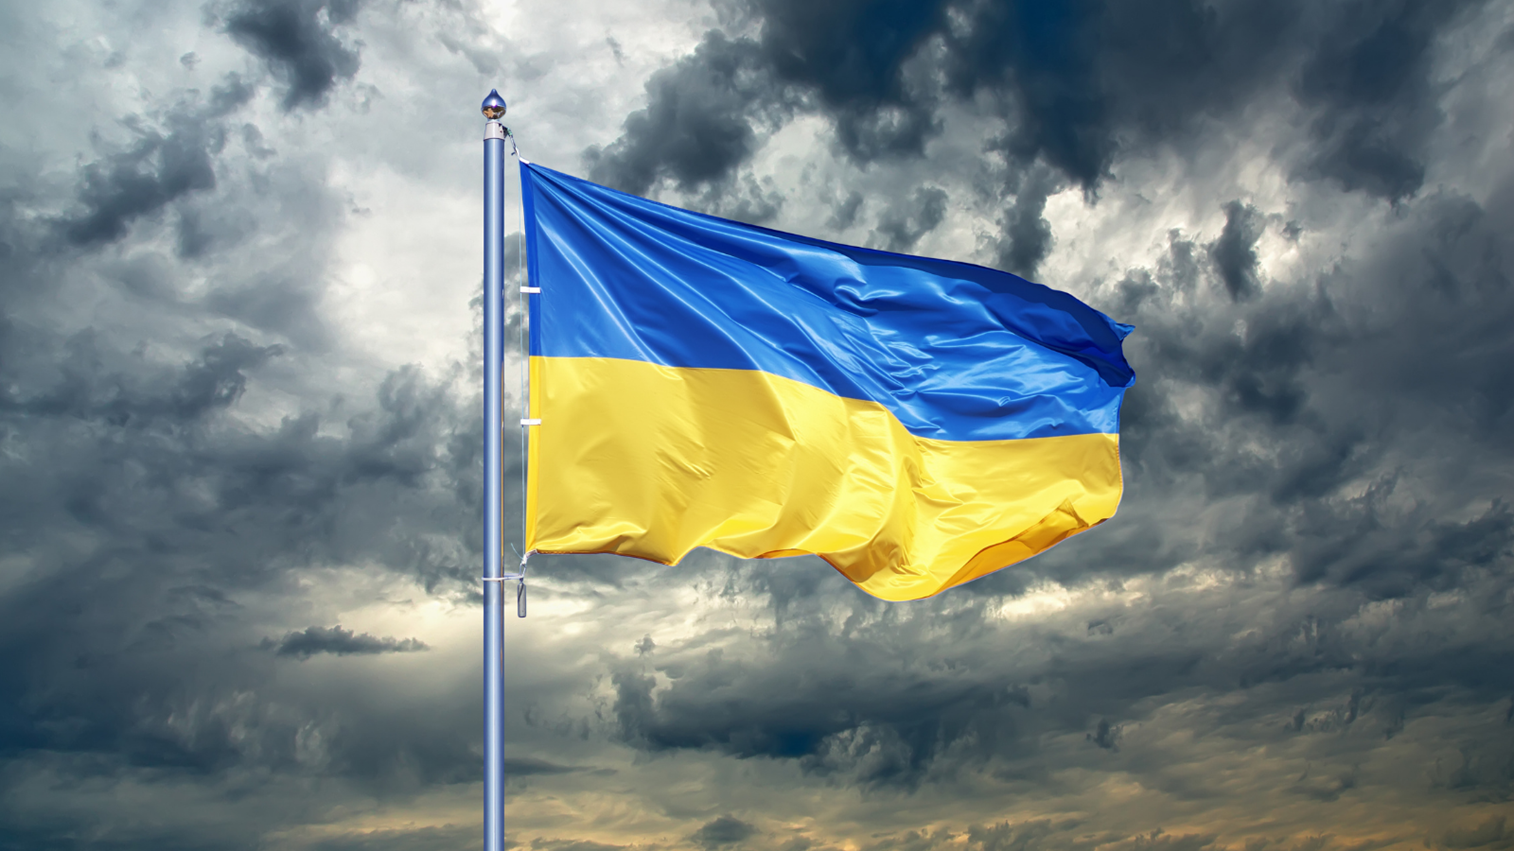 The Astbury Centre joins scientists across the world in watching events in Ukraine with horror.